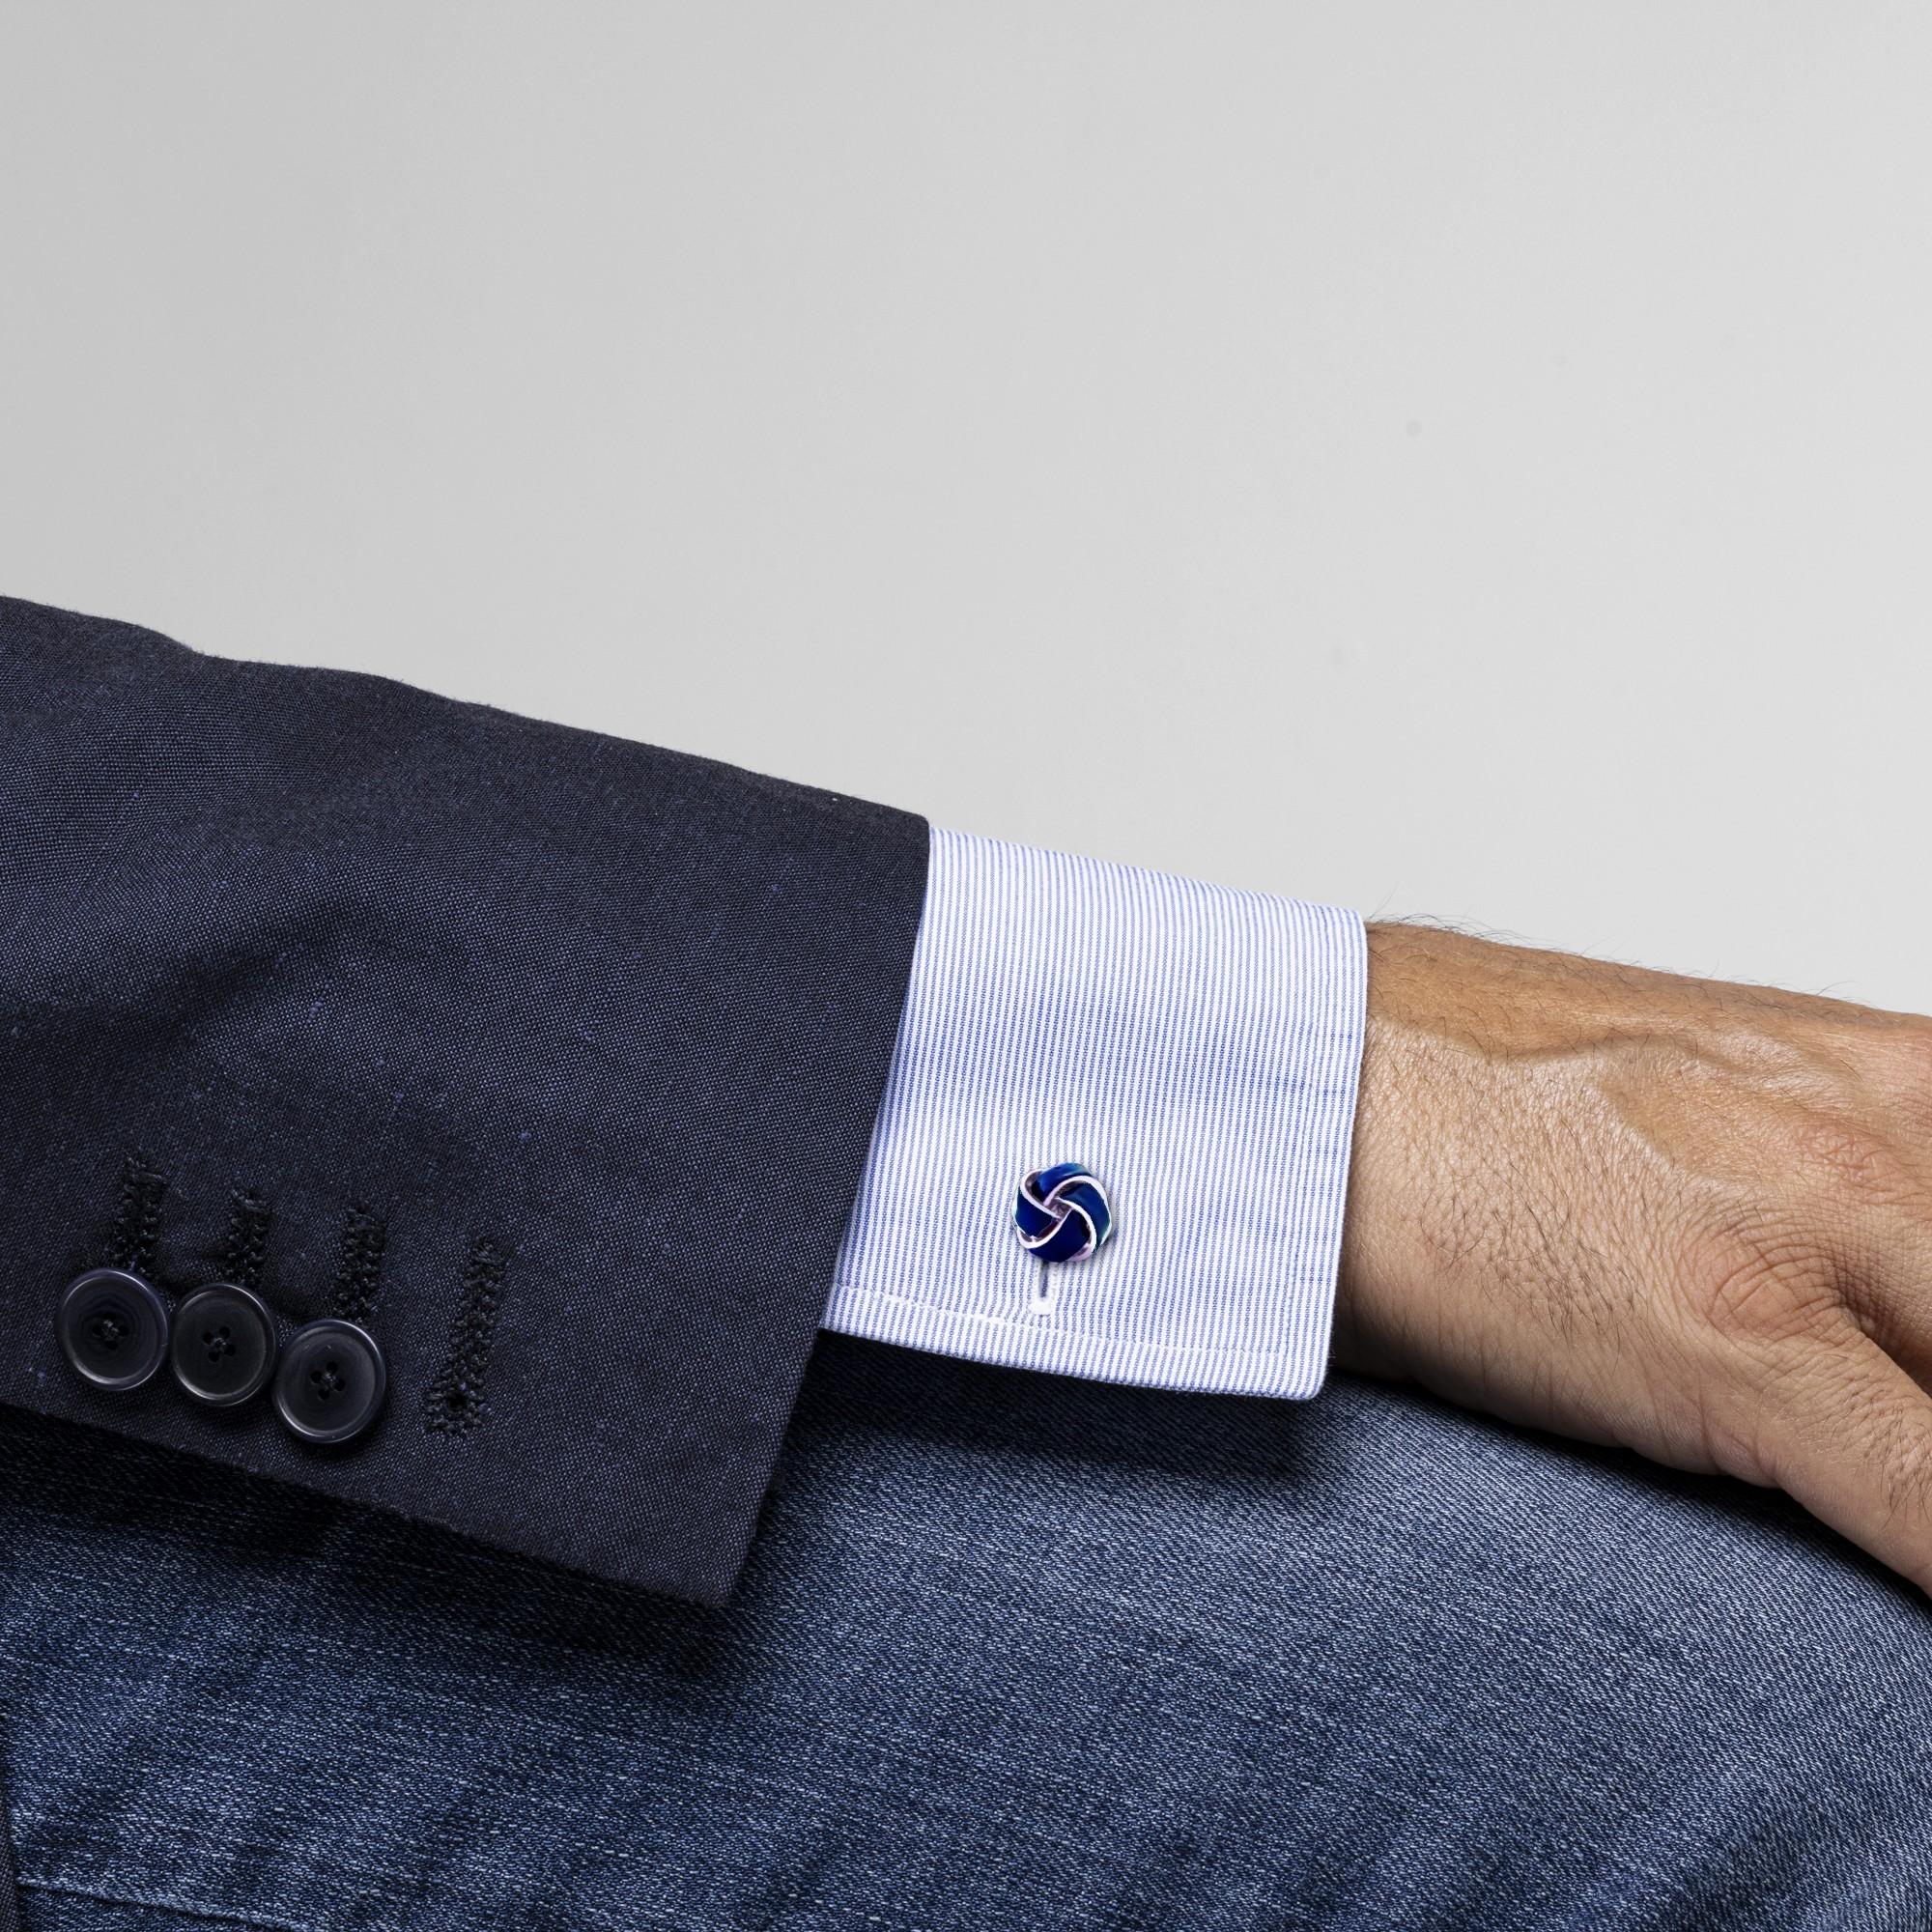 Alex Jona design collection, hand crafted in Italy, sterling silver knot cufflinks with petroleum blue enamel. These cufflinks feature a T-Bar fastening, aiding in easy use and confidence that they'll stay secured to your shirt. Dimensions: 